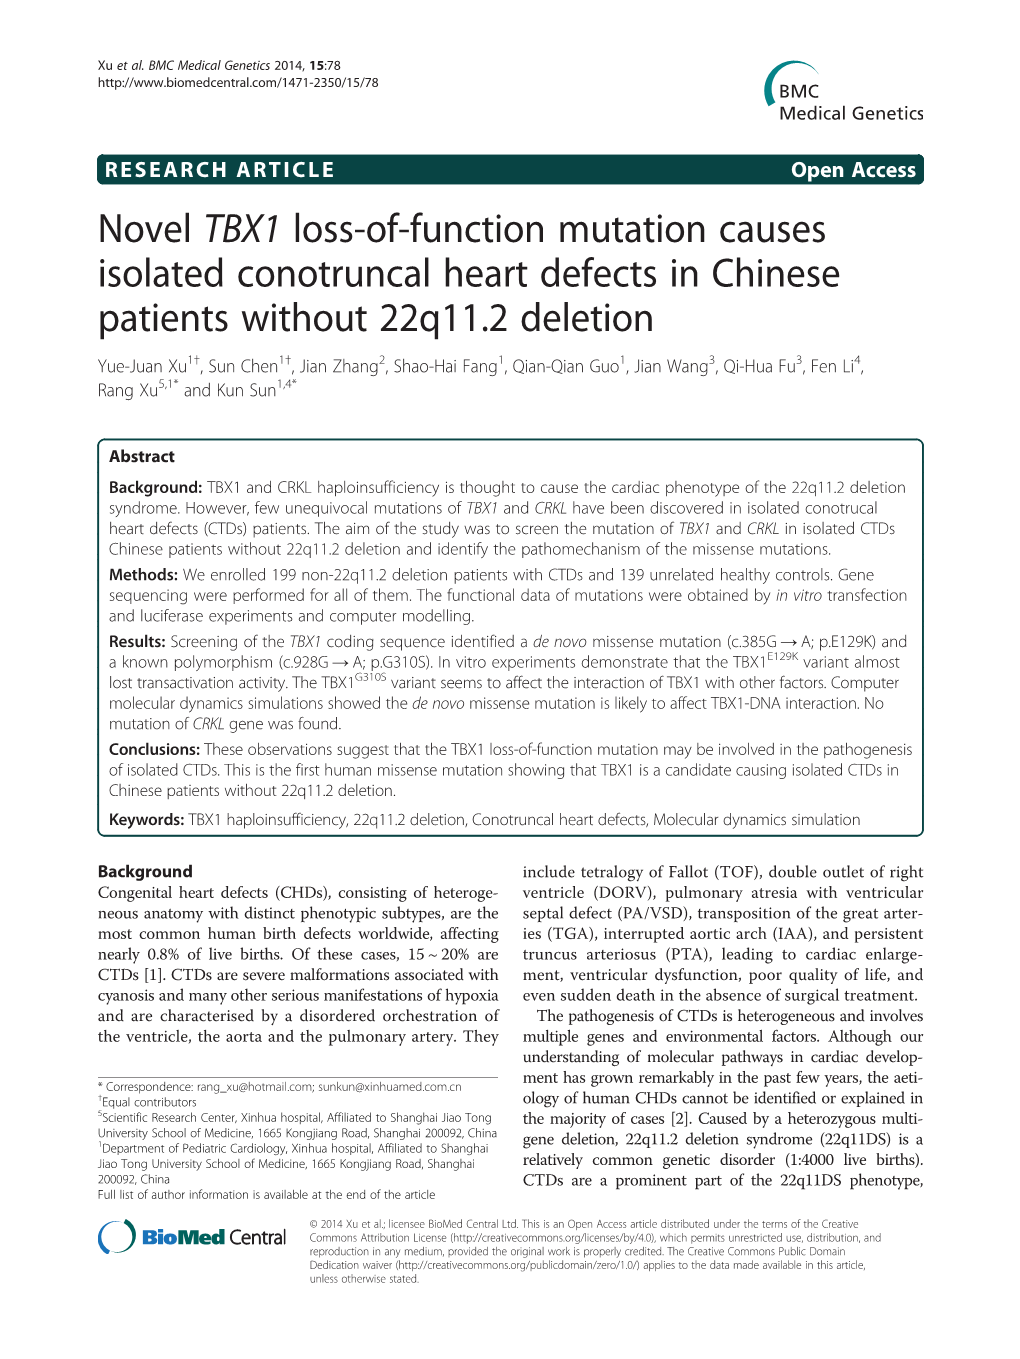 Novel TBX1 Loss-Of-Function Mutation Causes Isolated Conotruncal Heart